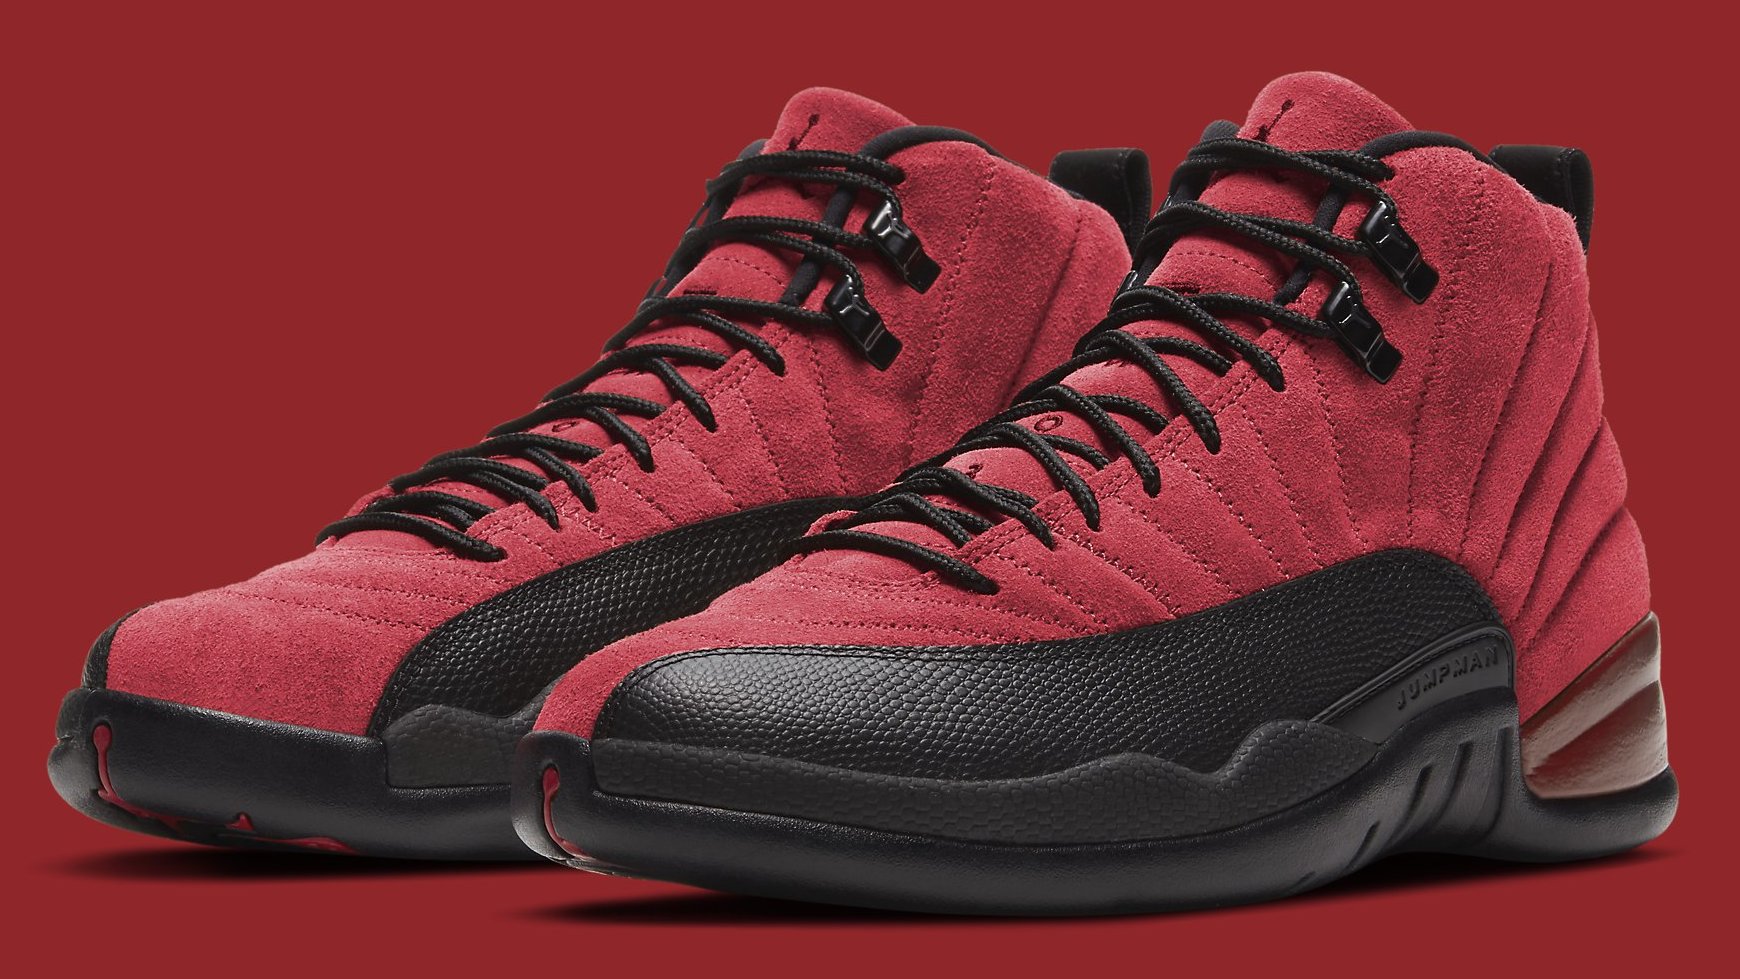 Air Jordan 12 Xii Varsity Red Black Release Date Ct8013-602 | Sole Collector